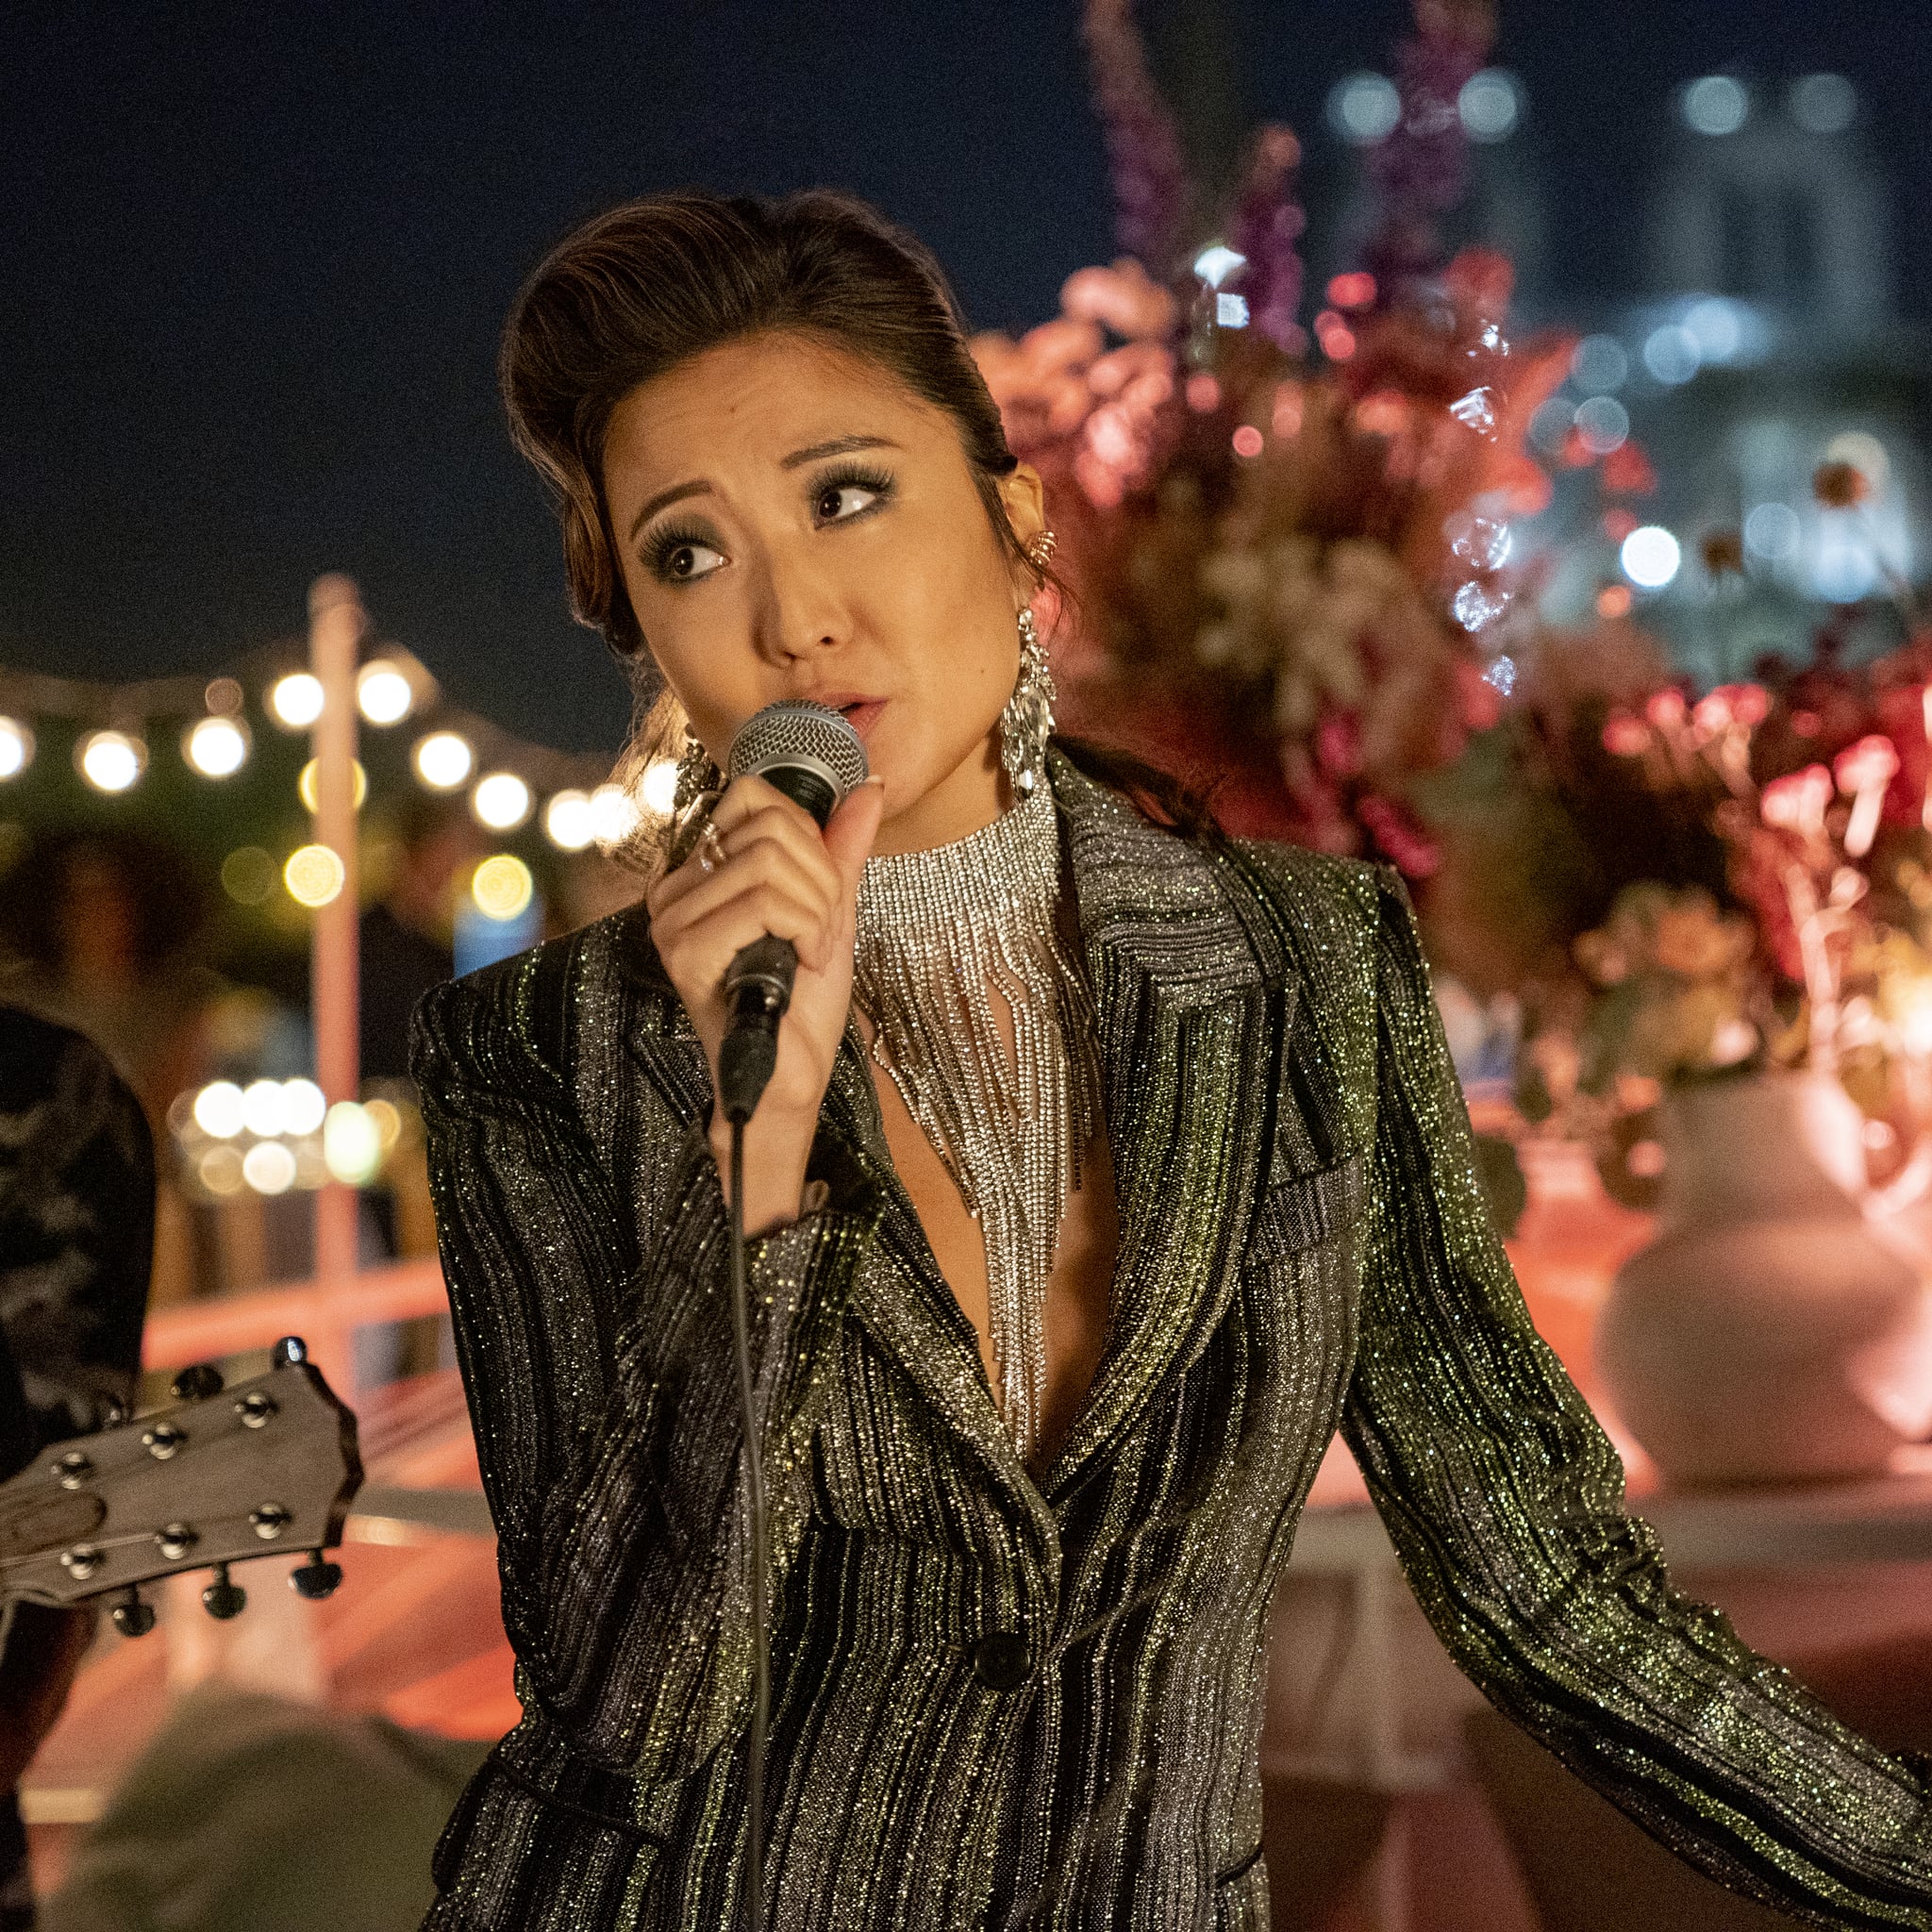 Mindy Chen's PrettyLittleThing Outfit from Emily in Paris Season 2